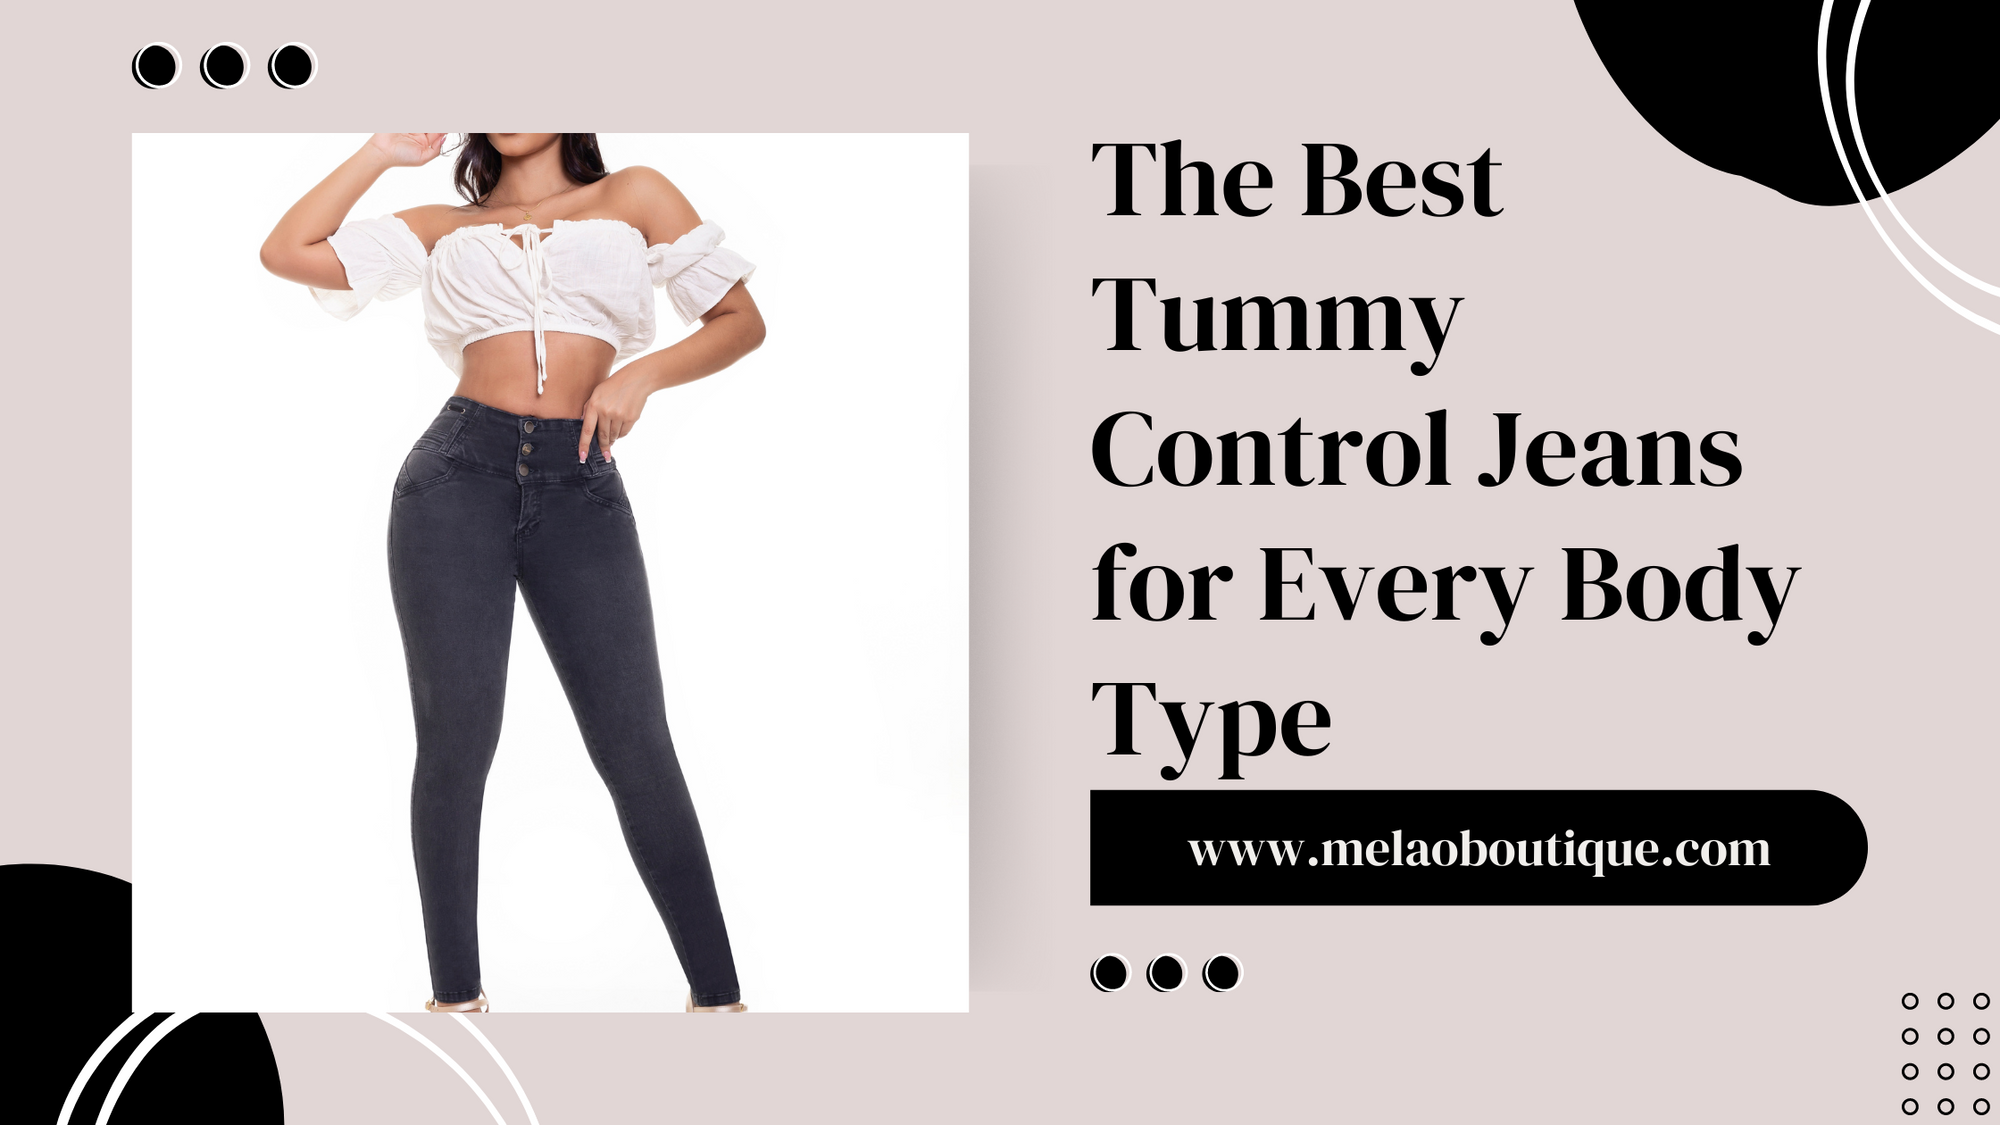 The Best Tummy Control Jeans for Every Body Type